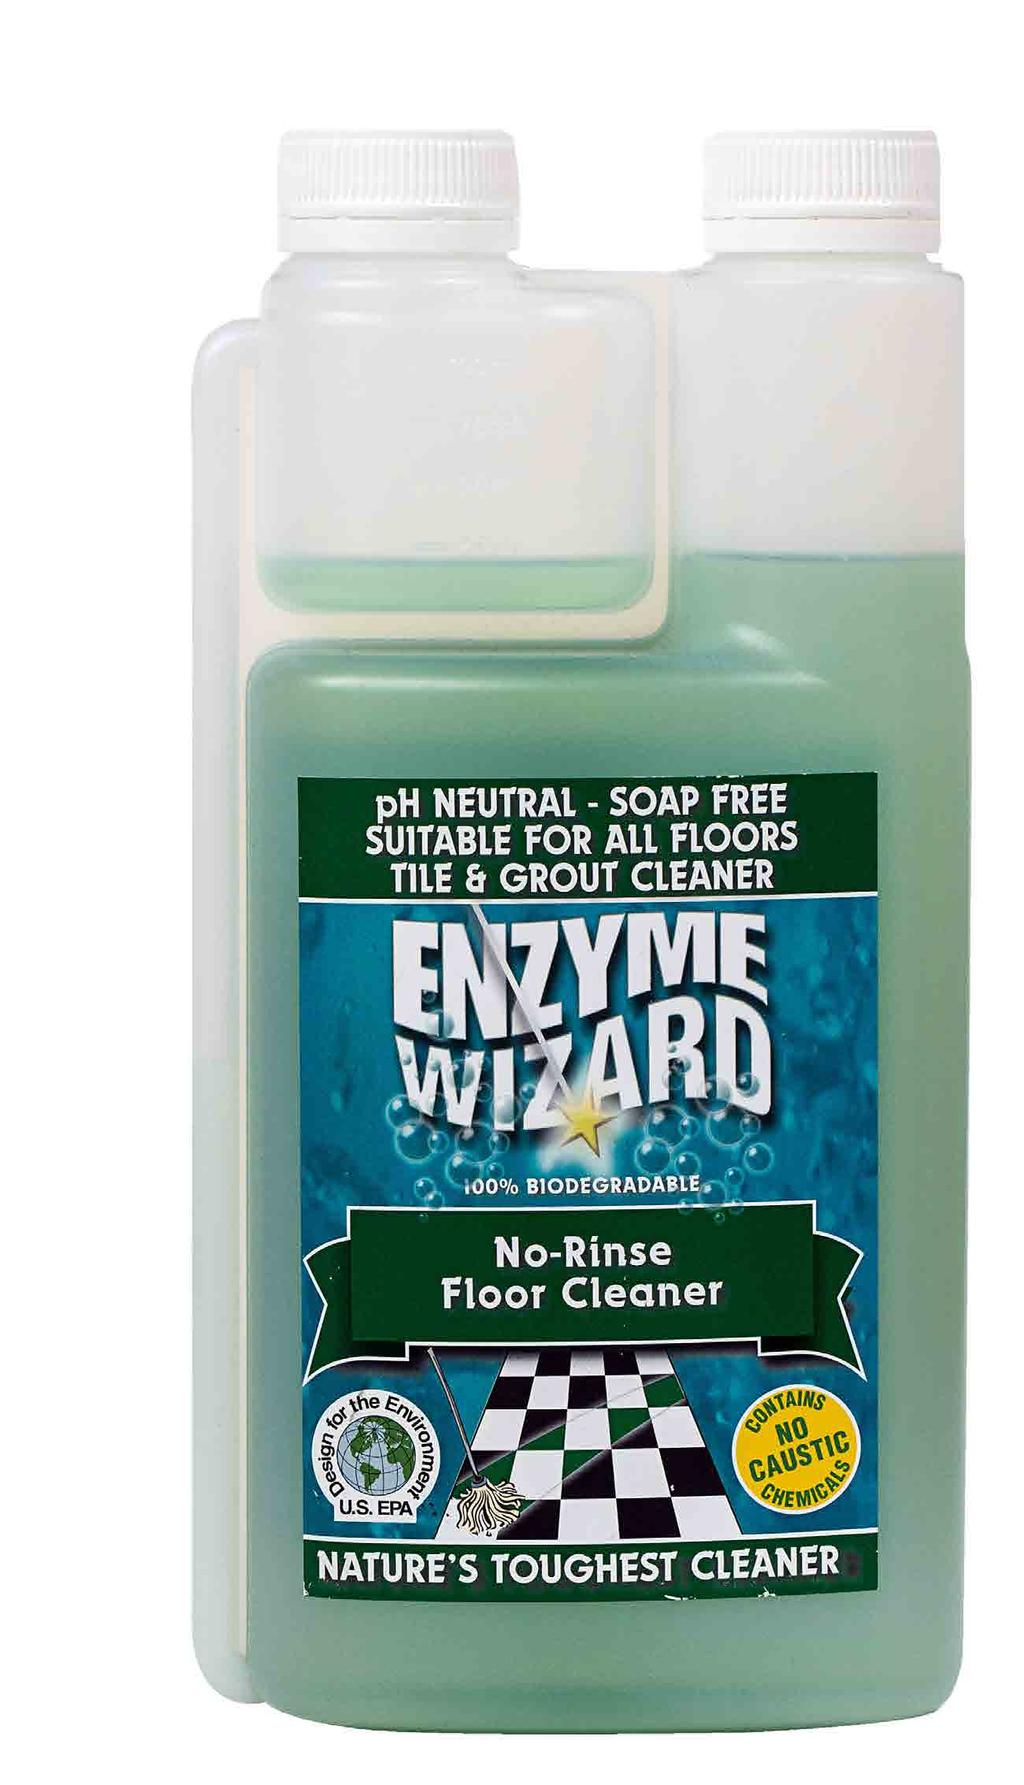 Rather than merely pushing the soil around with soap, the multi-enzyme formula destroys the grease, grime and Urine.